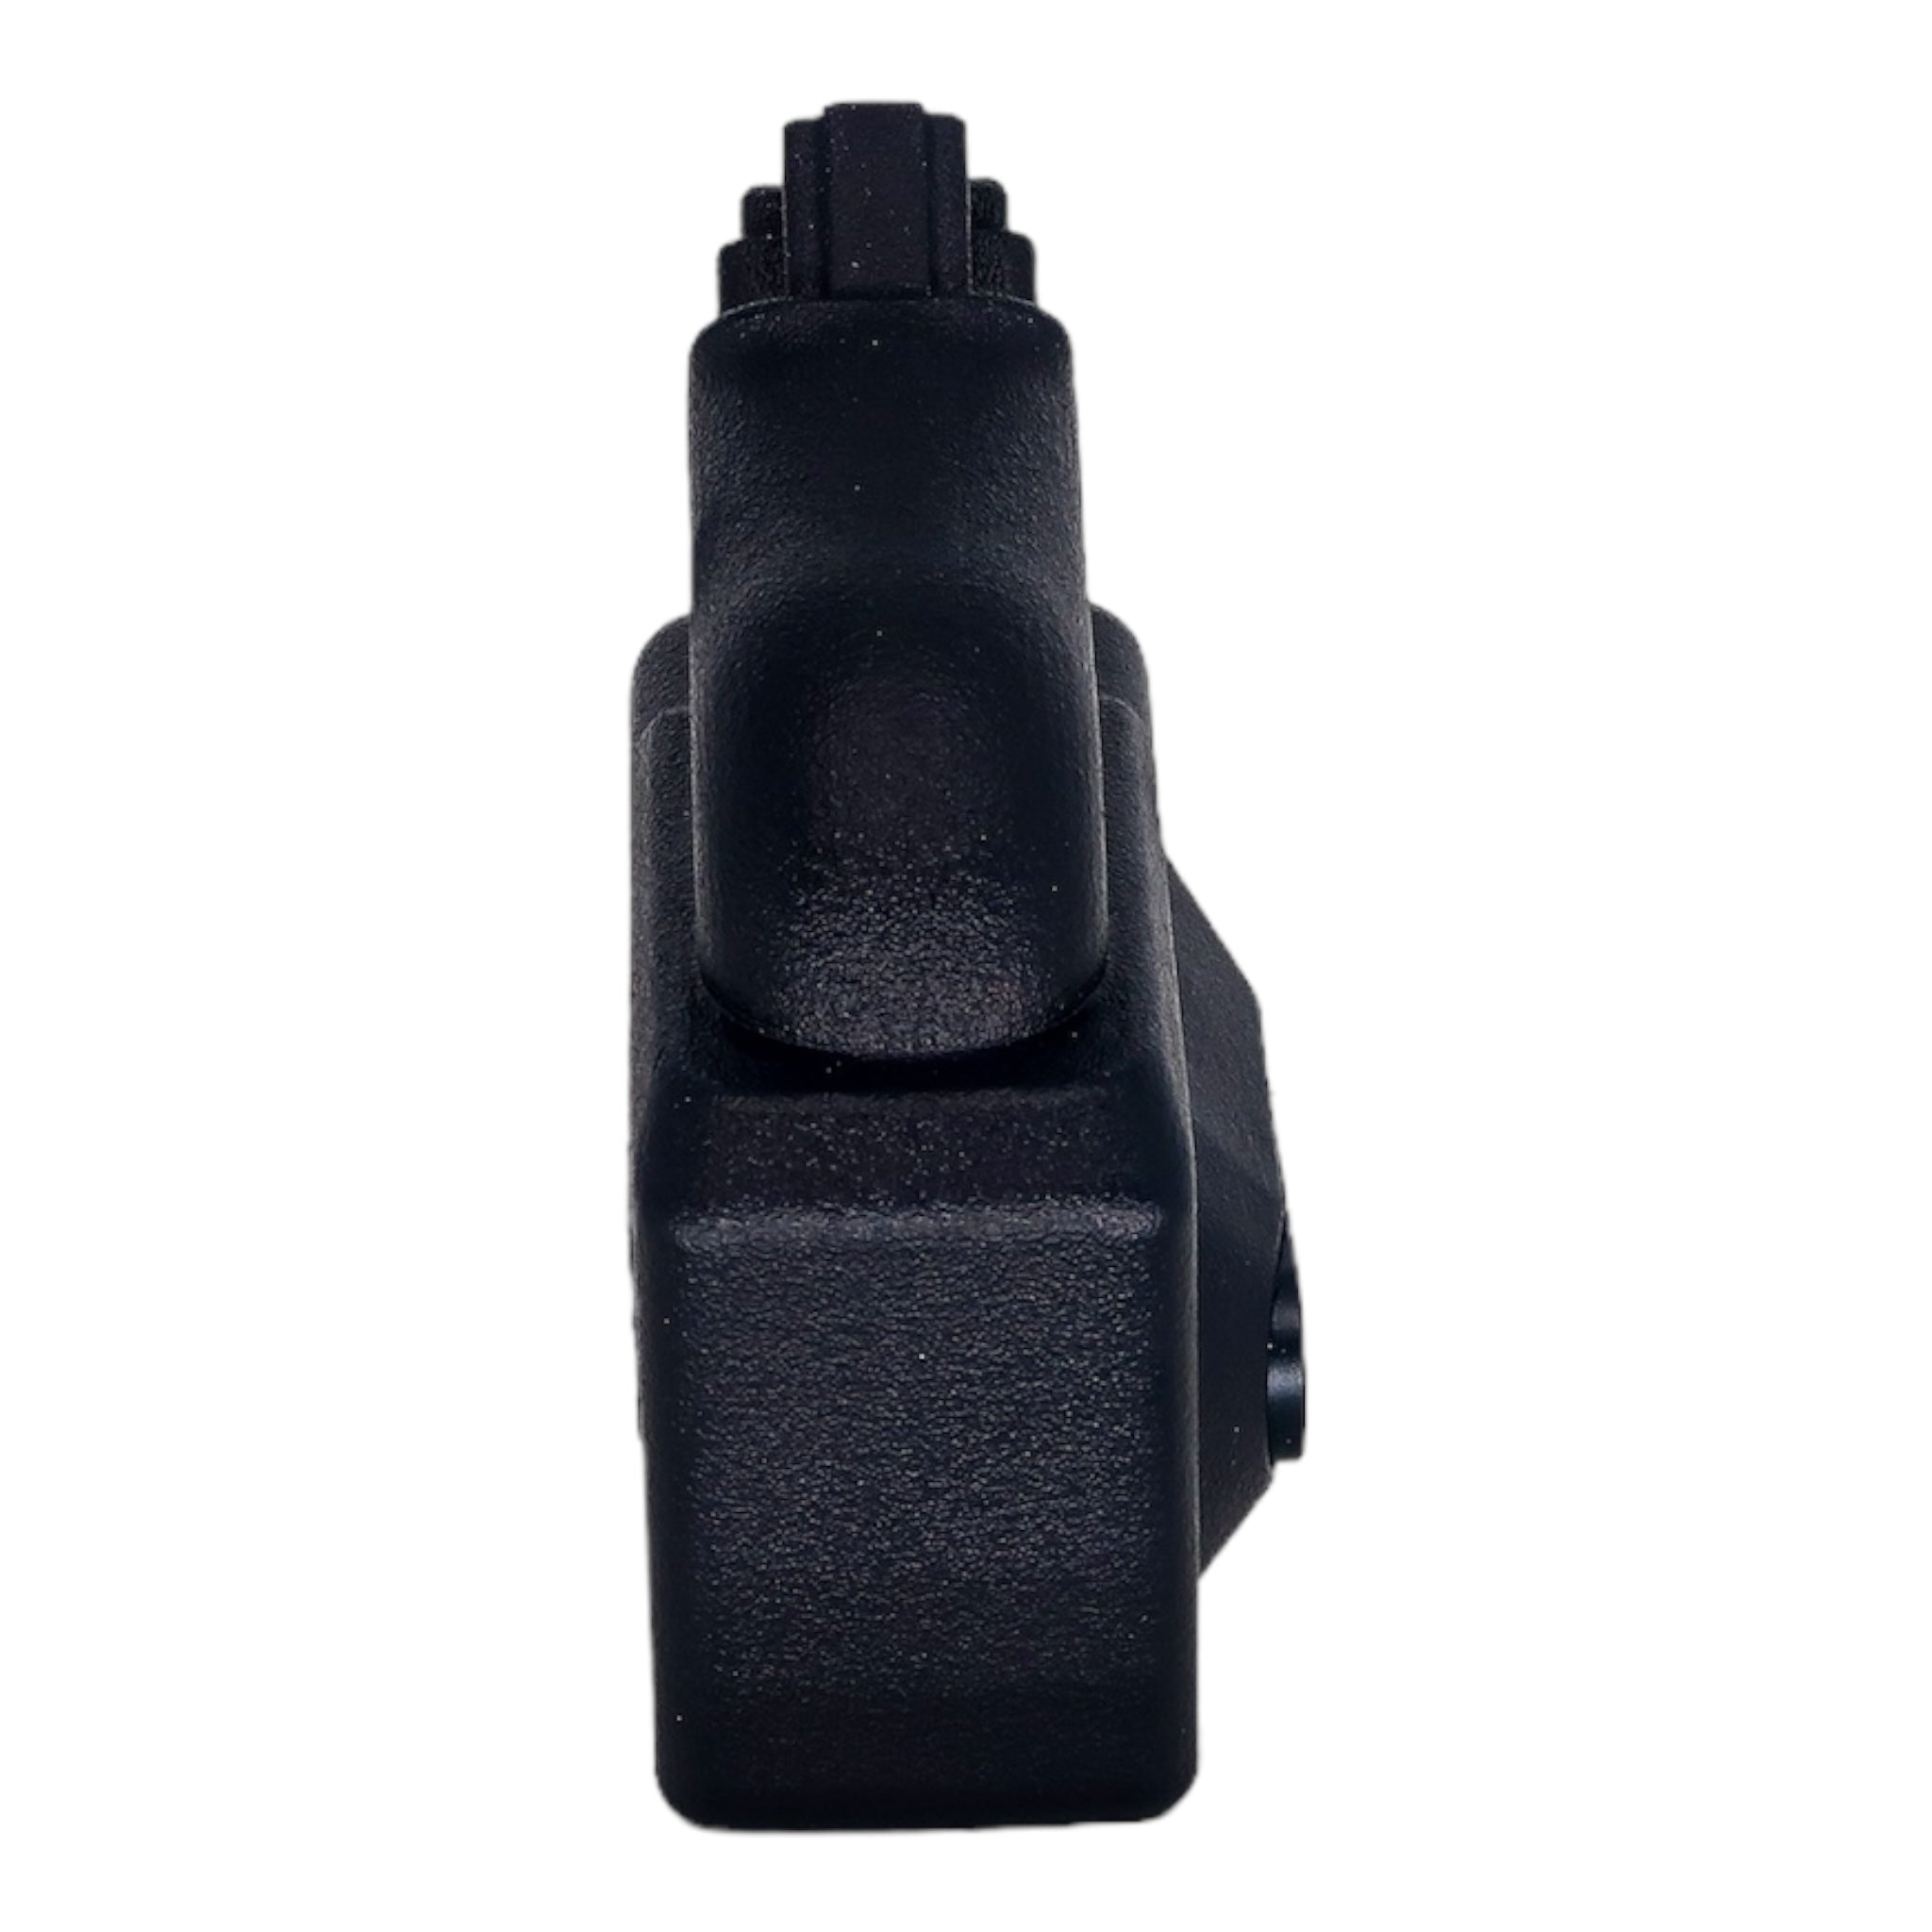 Primary Airsoft HI-CAPA HPA/M4 ANGLED ADAPTER - ssairsoft.com